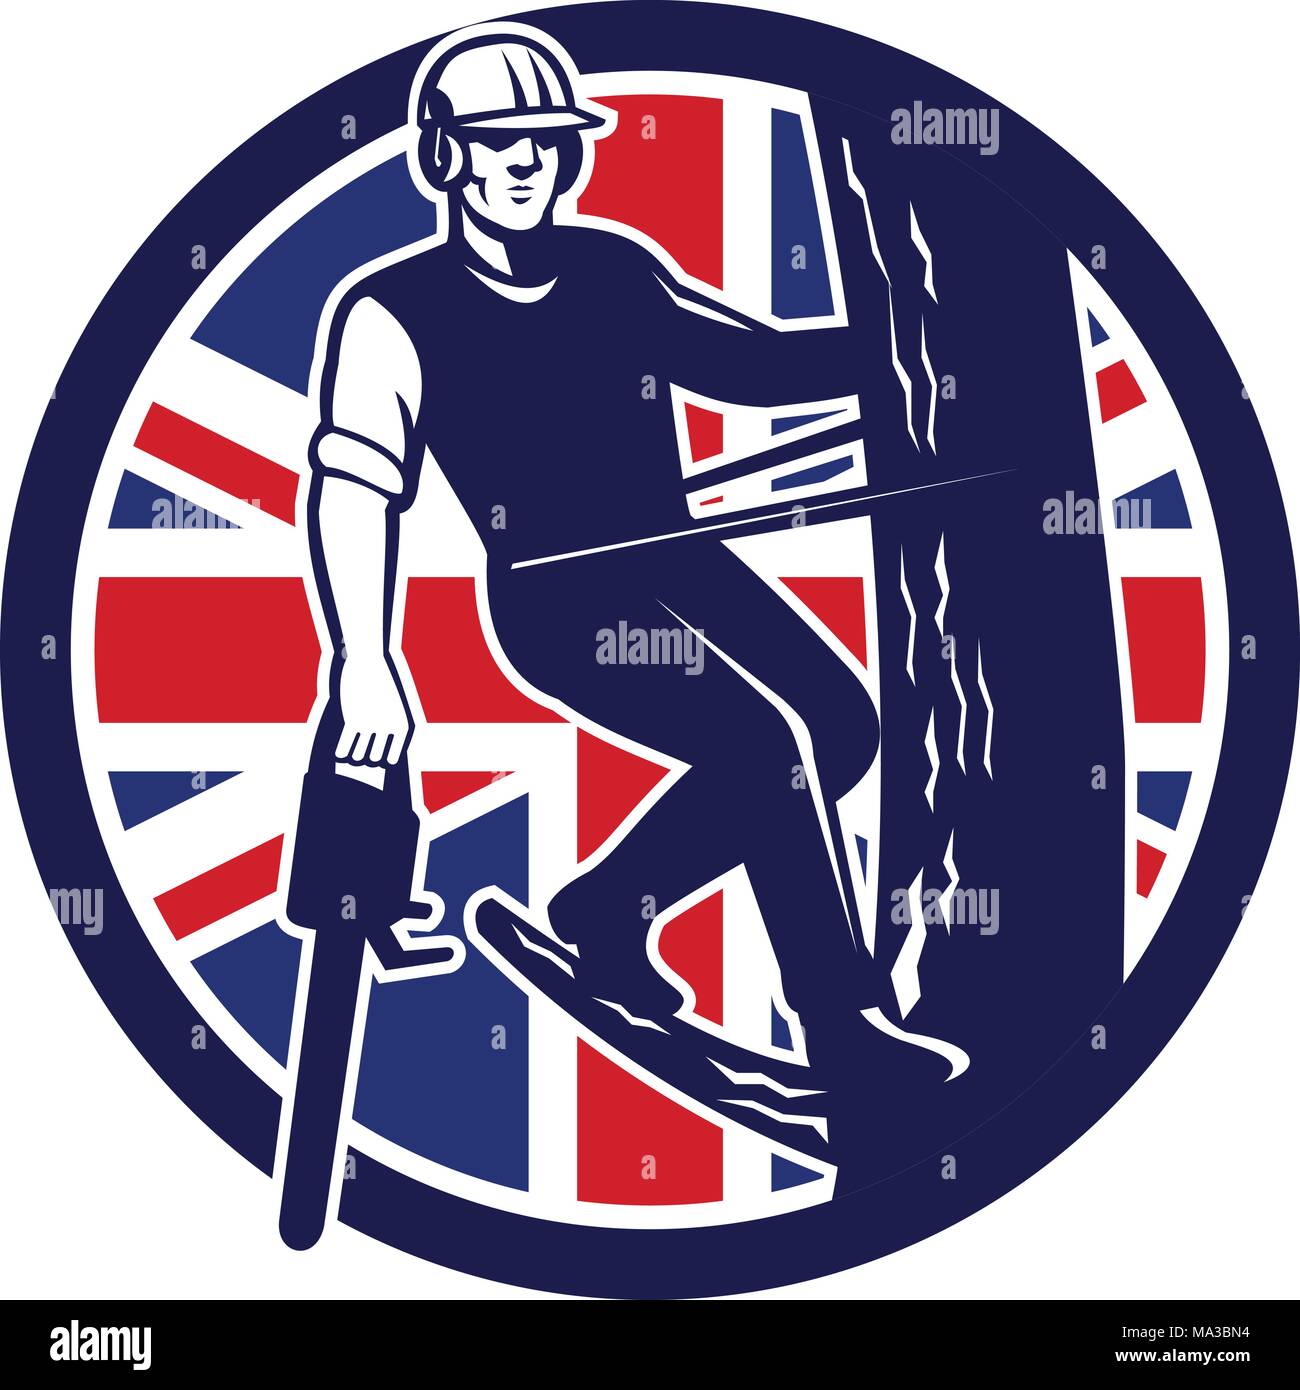 Icon retro style illustration of a British tree surgeon, arborist, tree surgeon, arboriculturist, holding chainsaw up tree branch with United Kingdom  Stock Vector